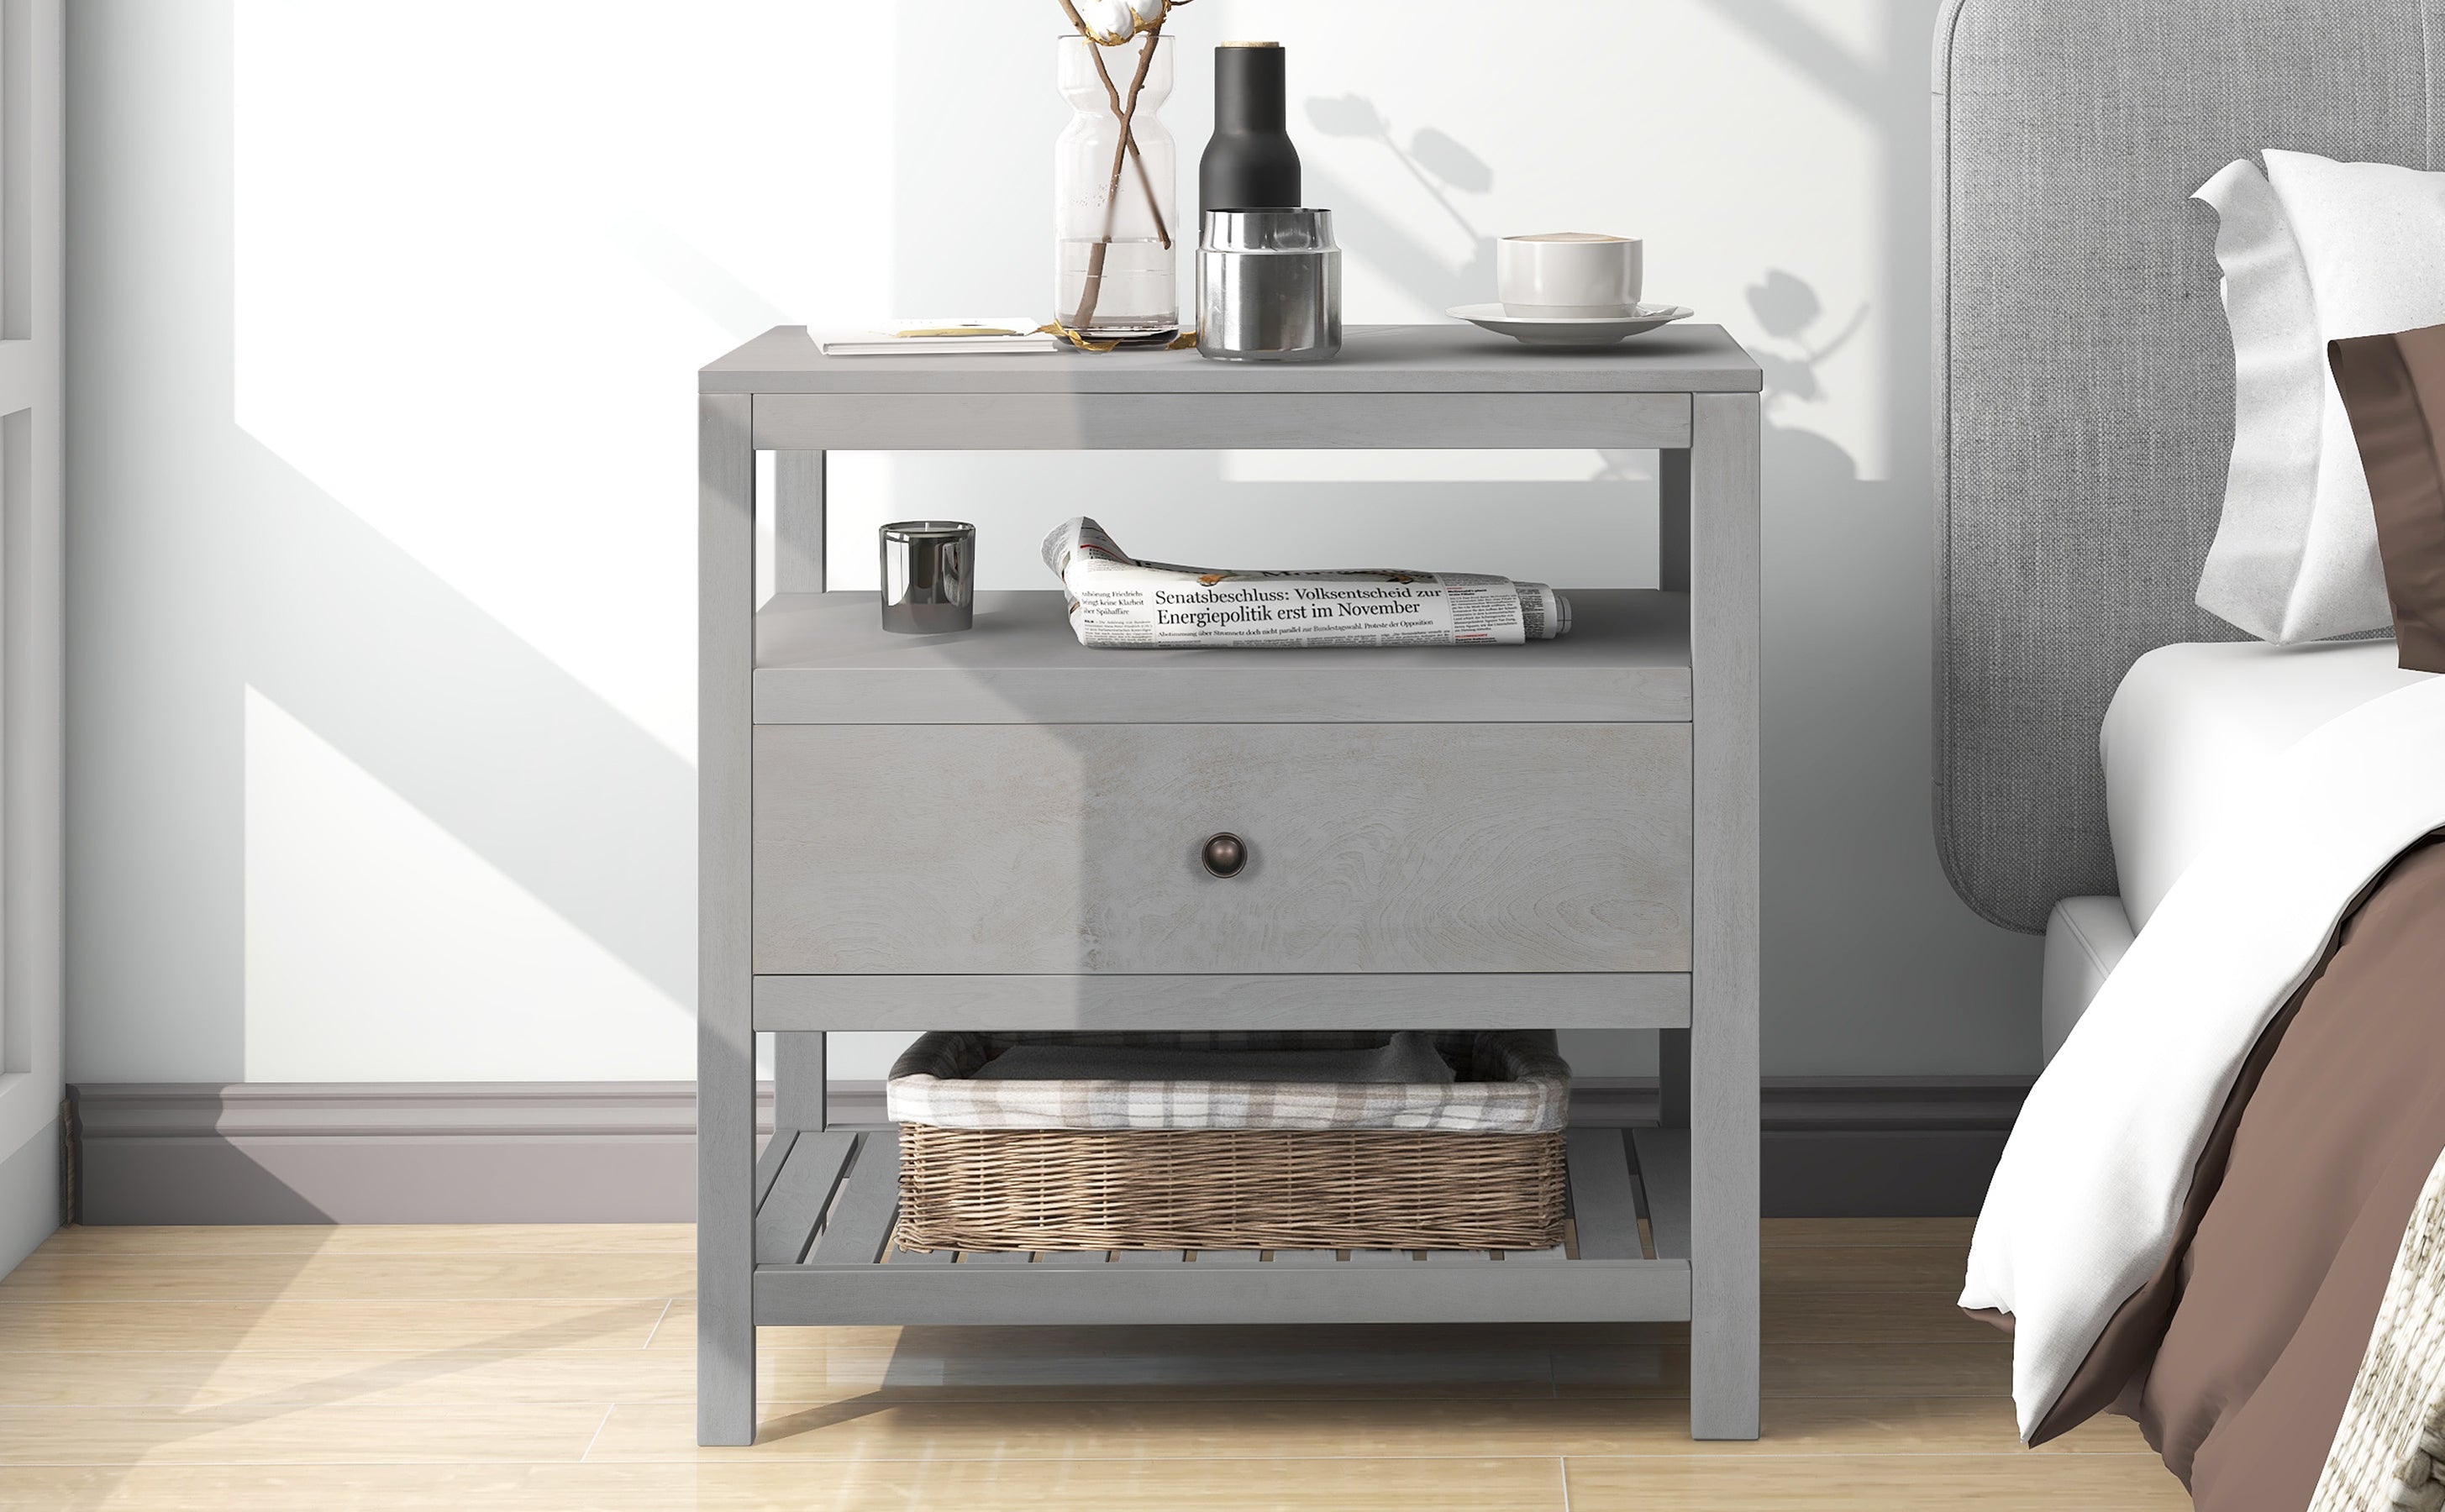 Modern Wooden Nightstand with Drawers Storage (Gray)